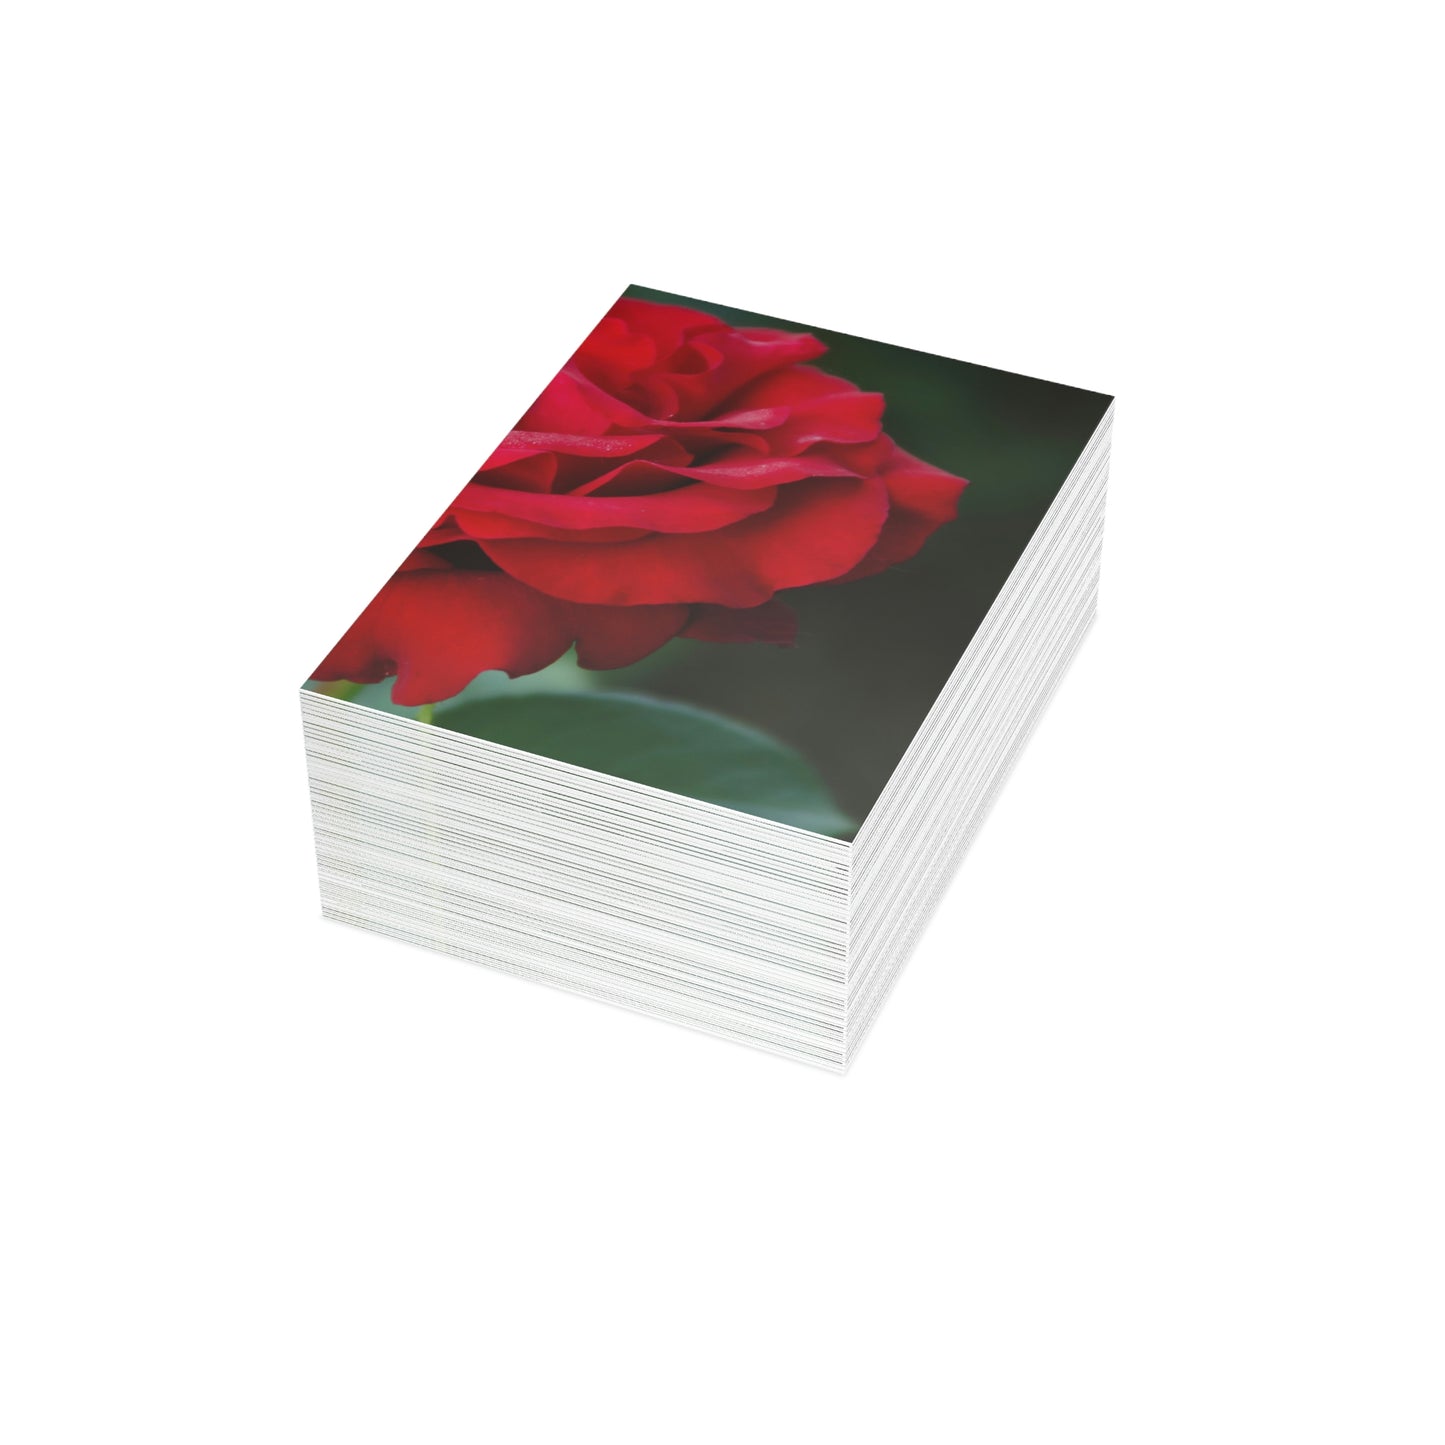 Flowers 13 Greeting Cards (1, 10, 30, and 50pcs)